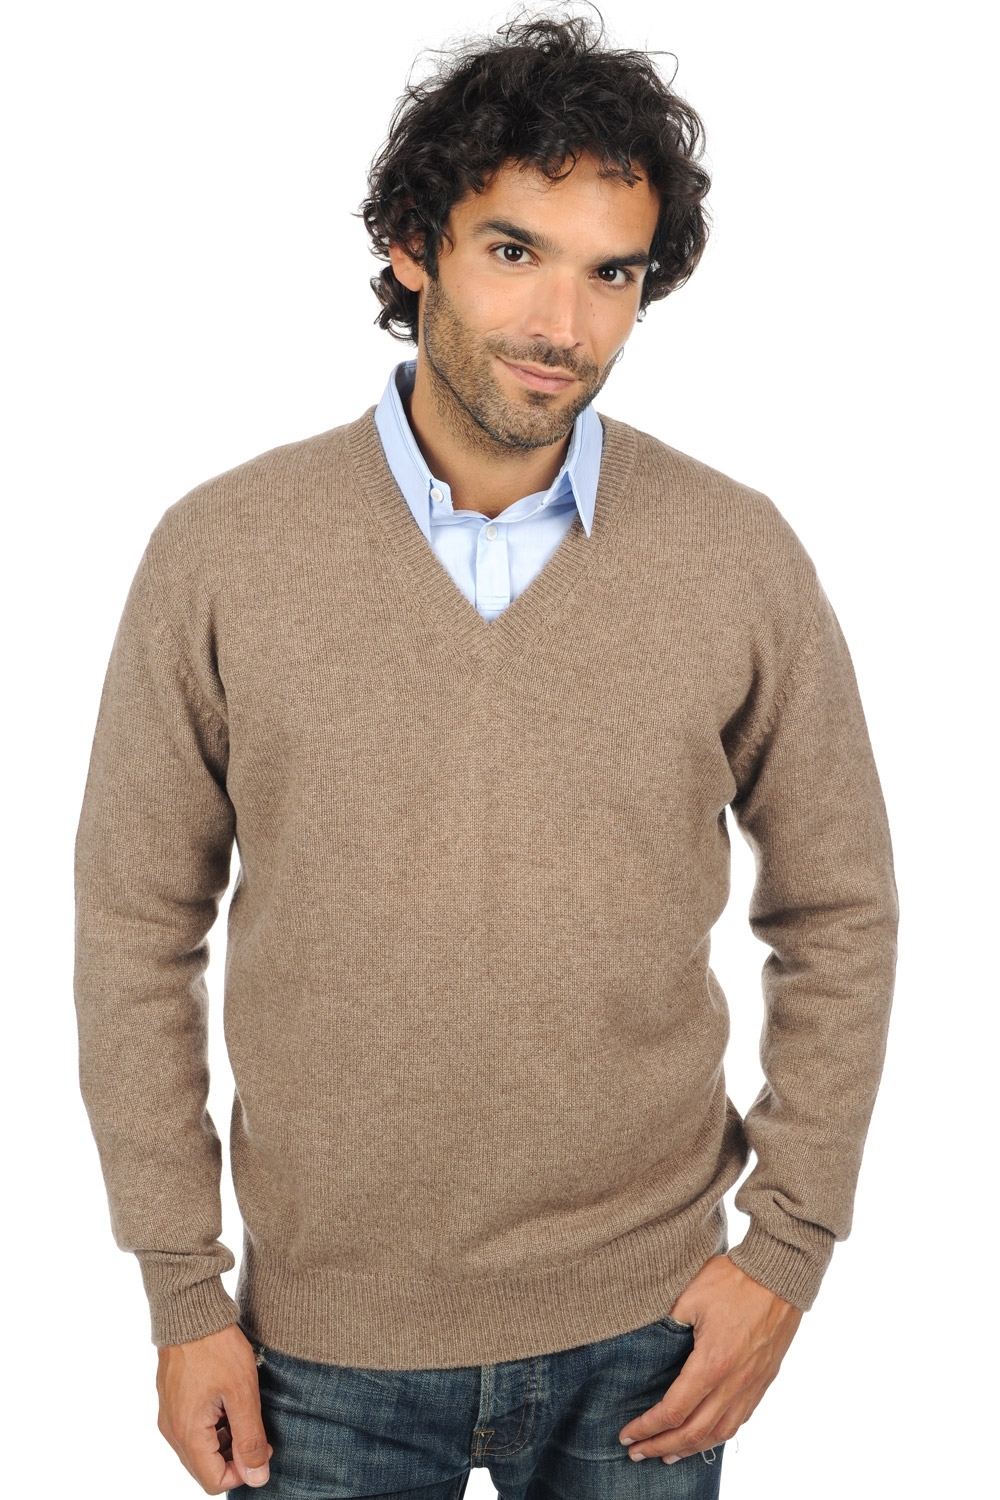 Cachemire pull homme col v hippolyte 4f natural brown 4xl